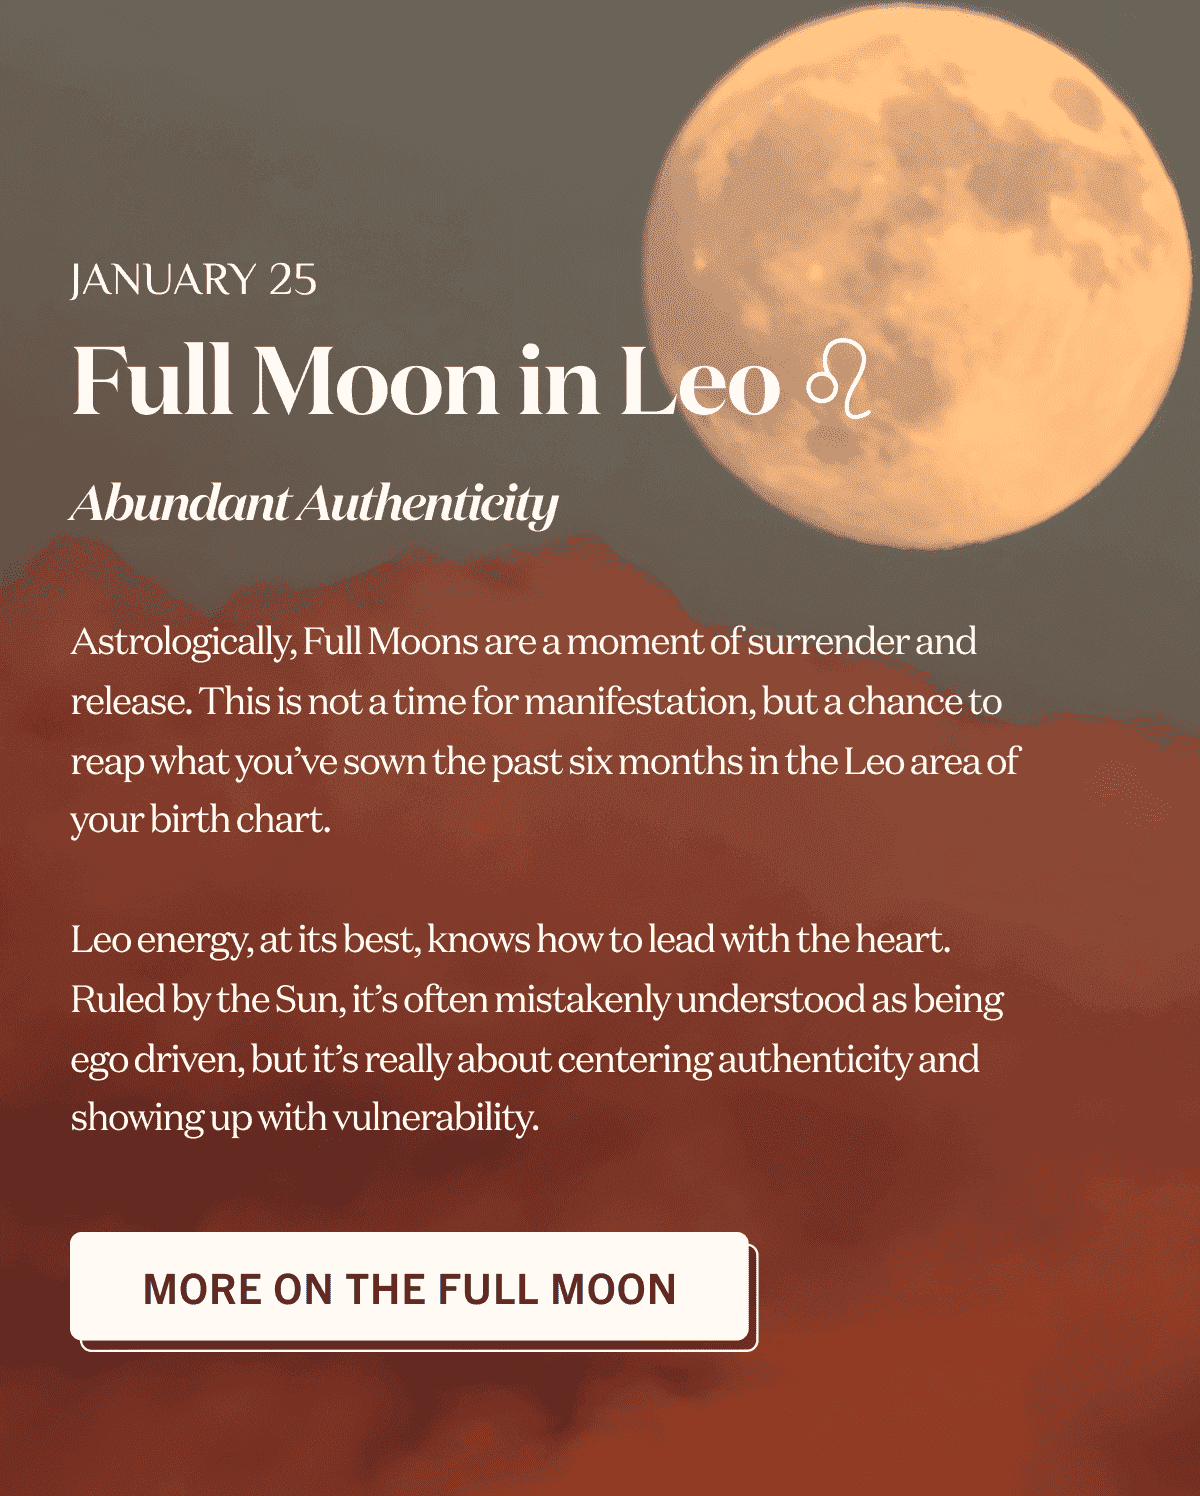 Read more on the full moon in Leo